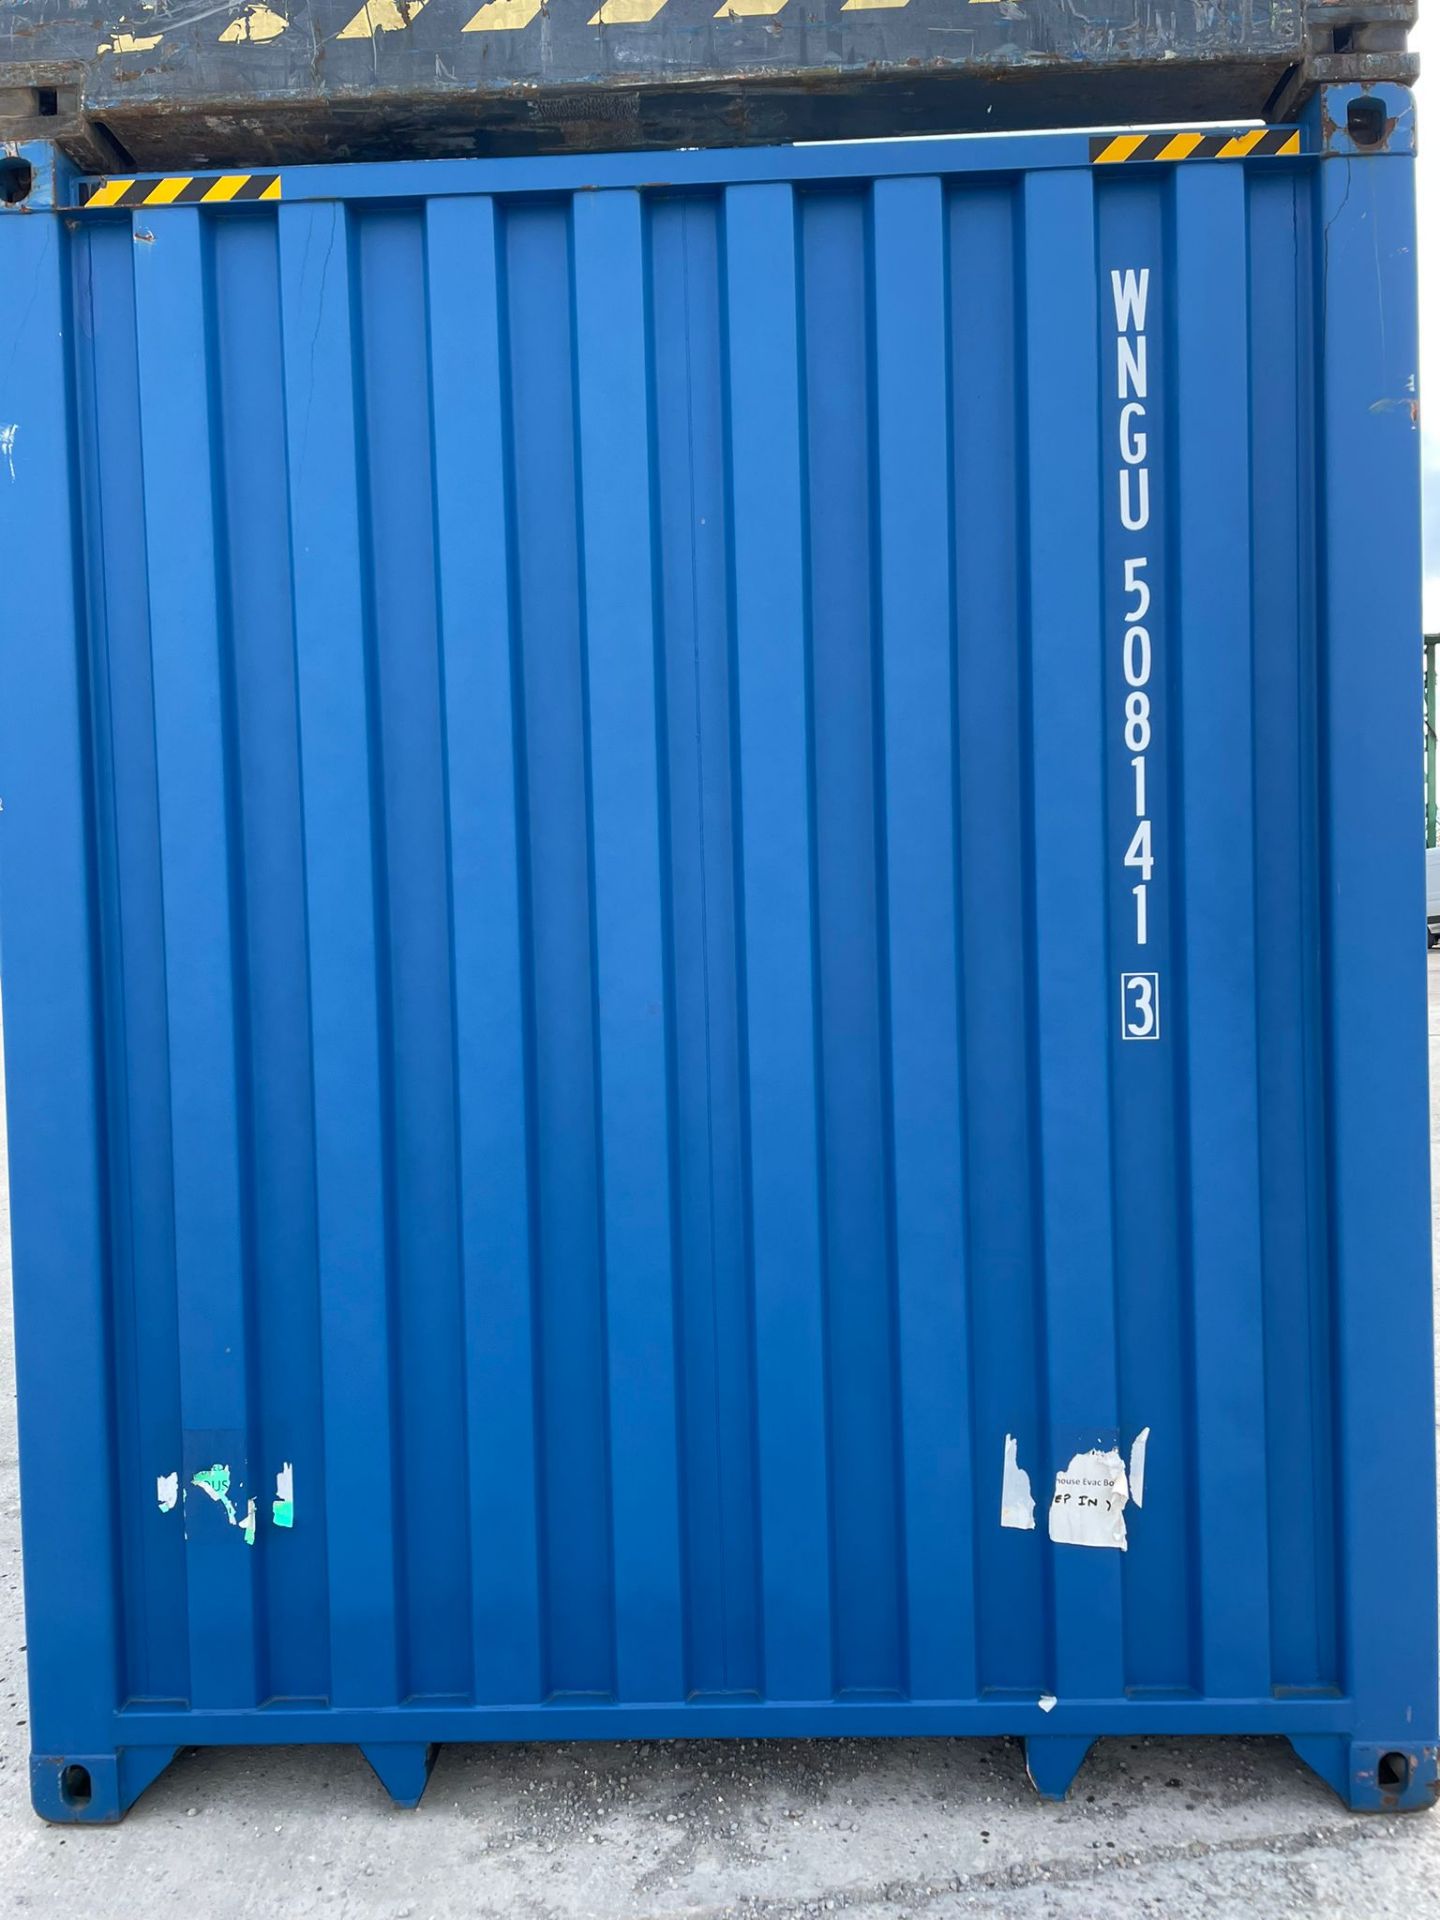 40ft HC Shipping Container - ref WNGU5081413 - NO RESERVE - Image 3 of 5